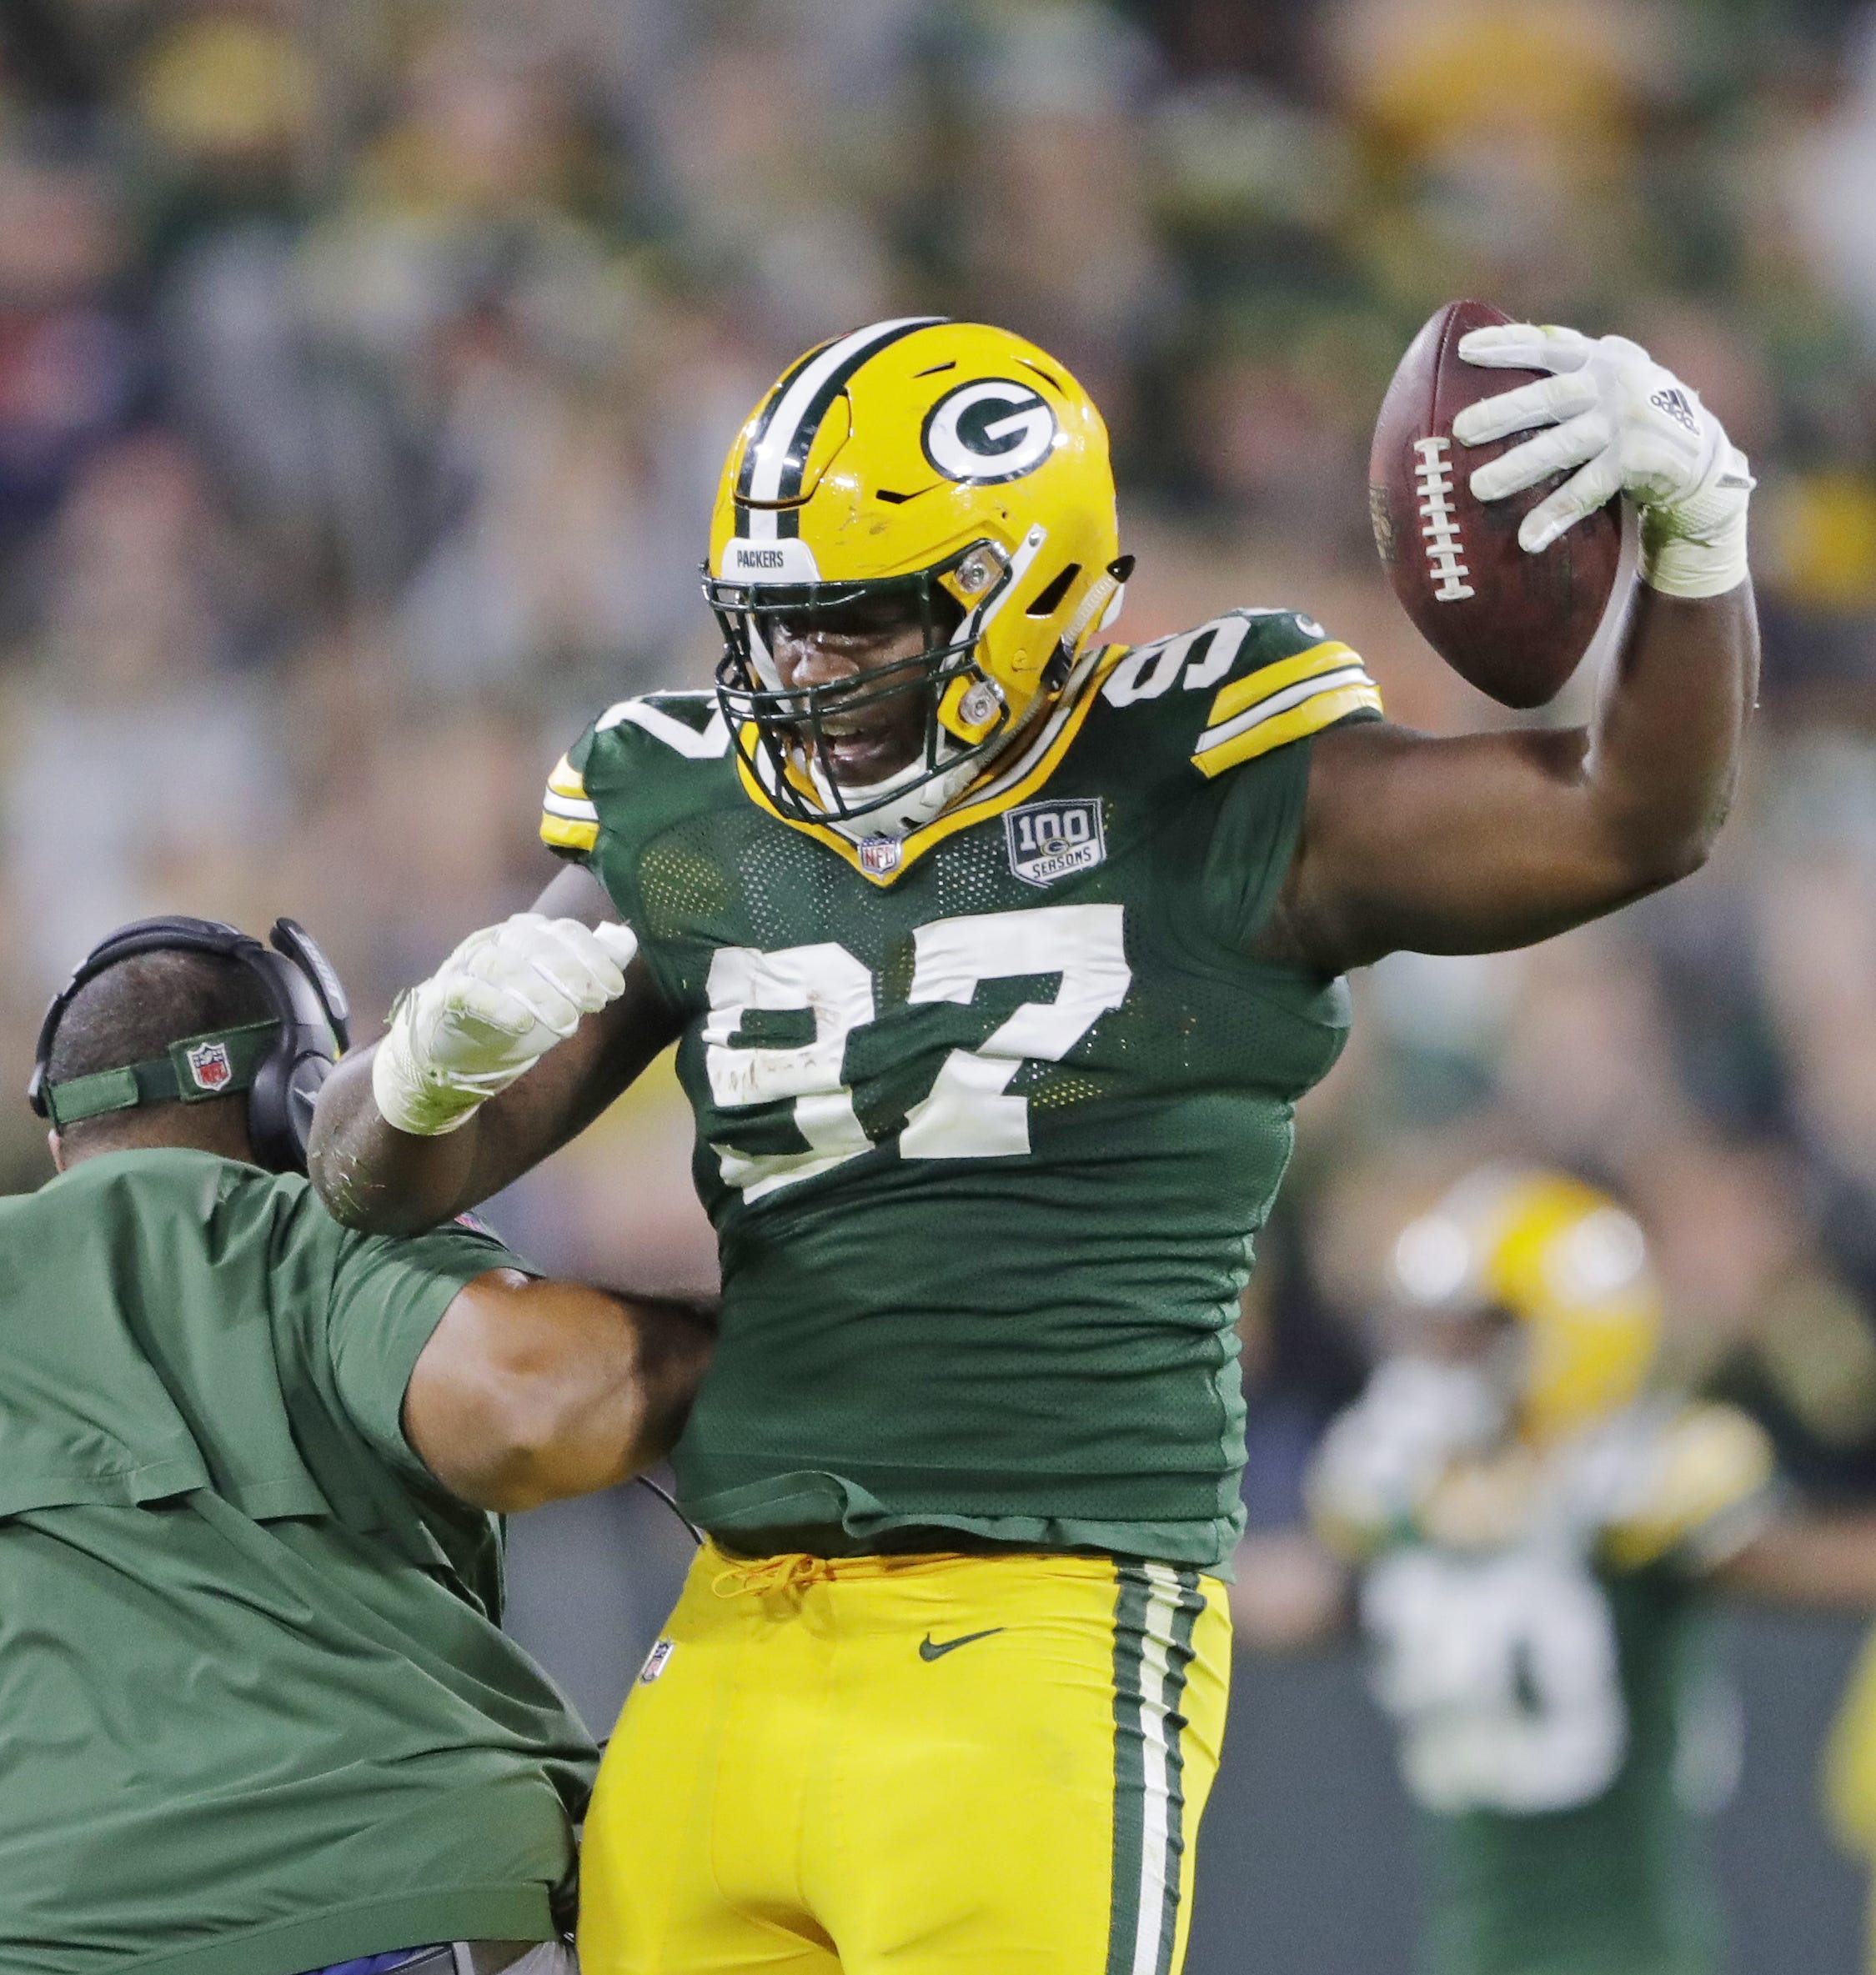 Green Bay Packers nose tackle Kenny Clark (97) reacts after recovering a fumble in the fourth quarter against the Chicago Bears at Lambeau Field on Sunday, September 9, 2018 in Green Bay, Wis.
Adam Wesley/USA TODAY NETWORK-Wisconsin